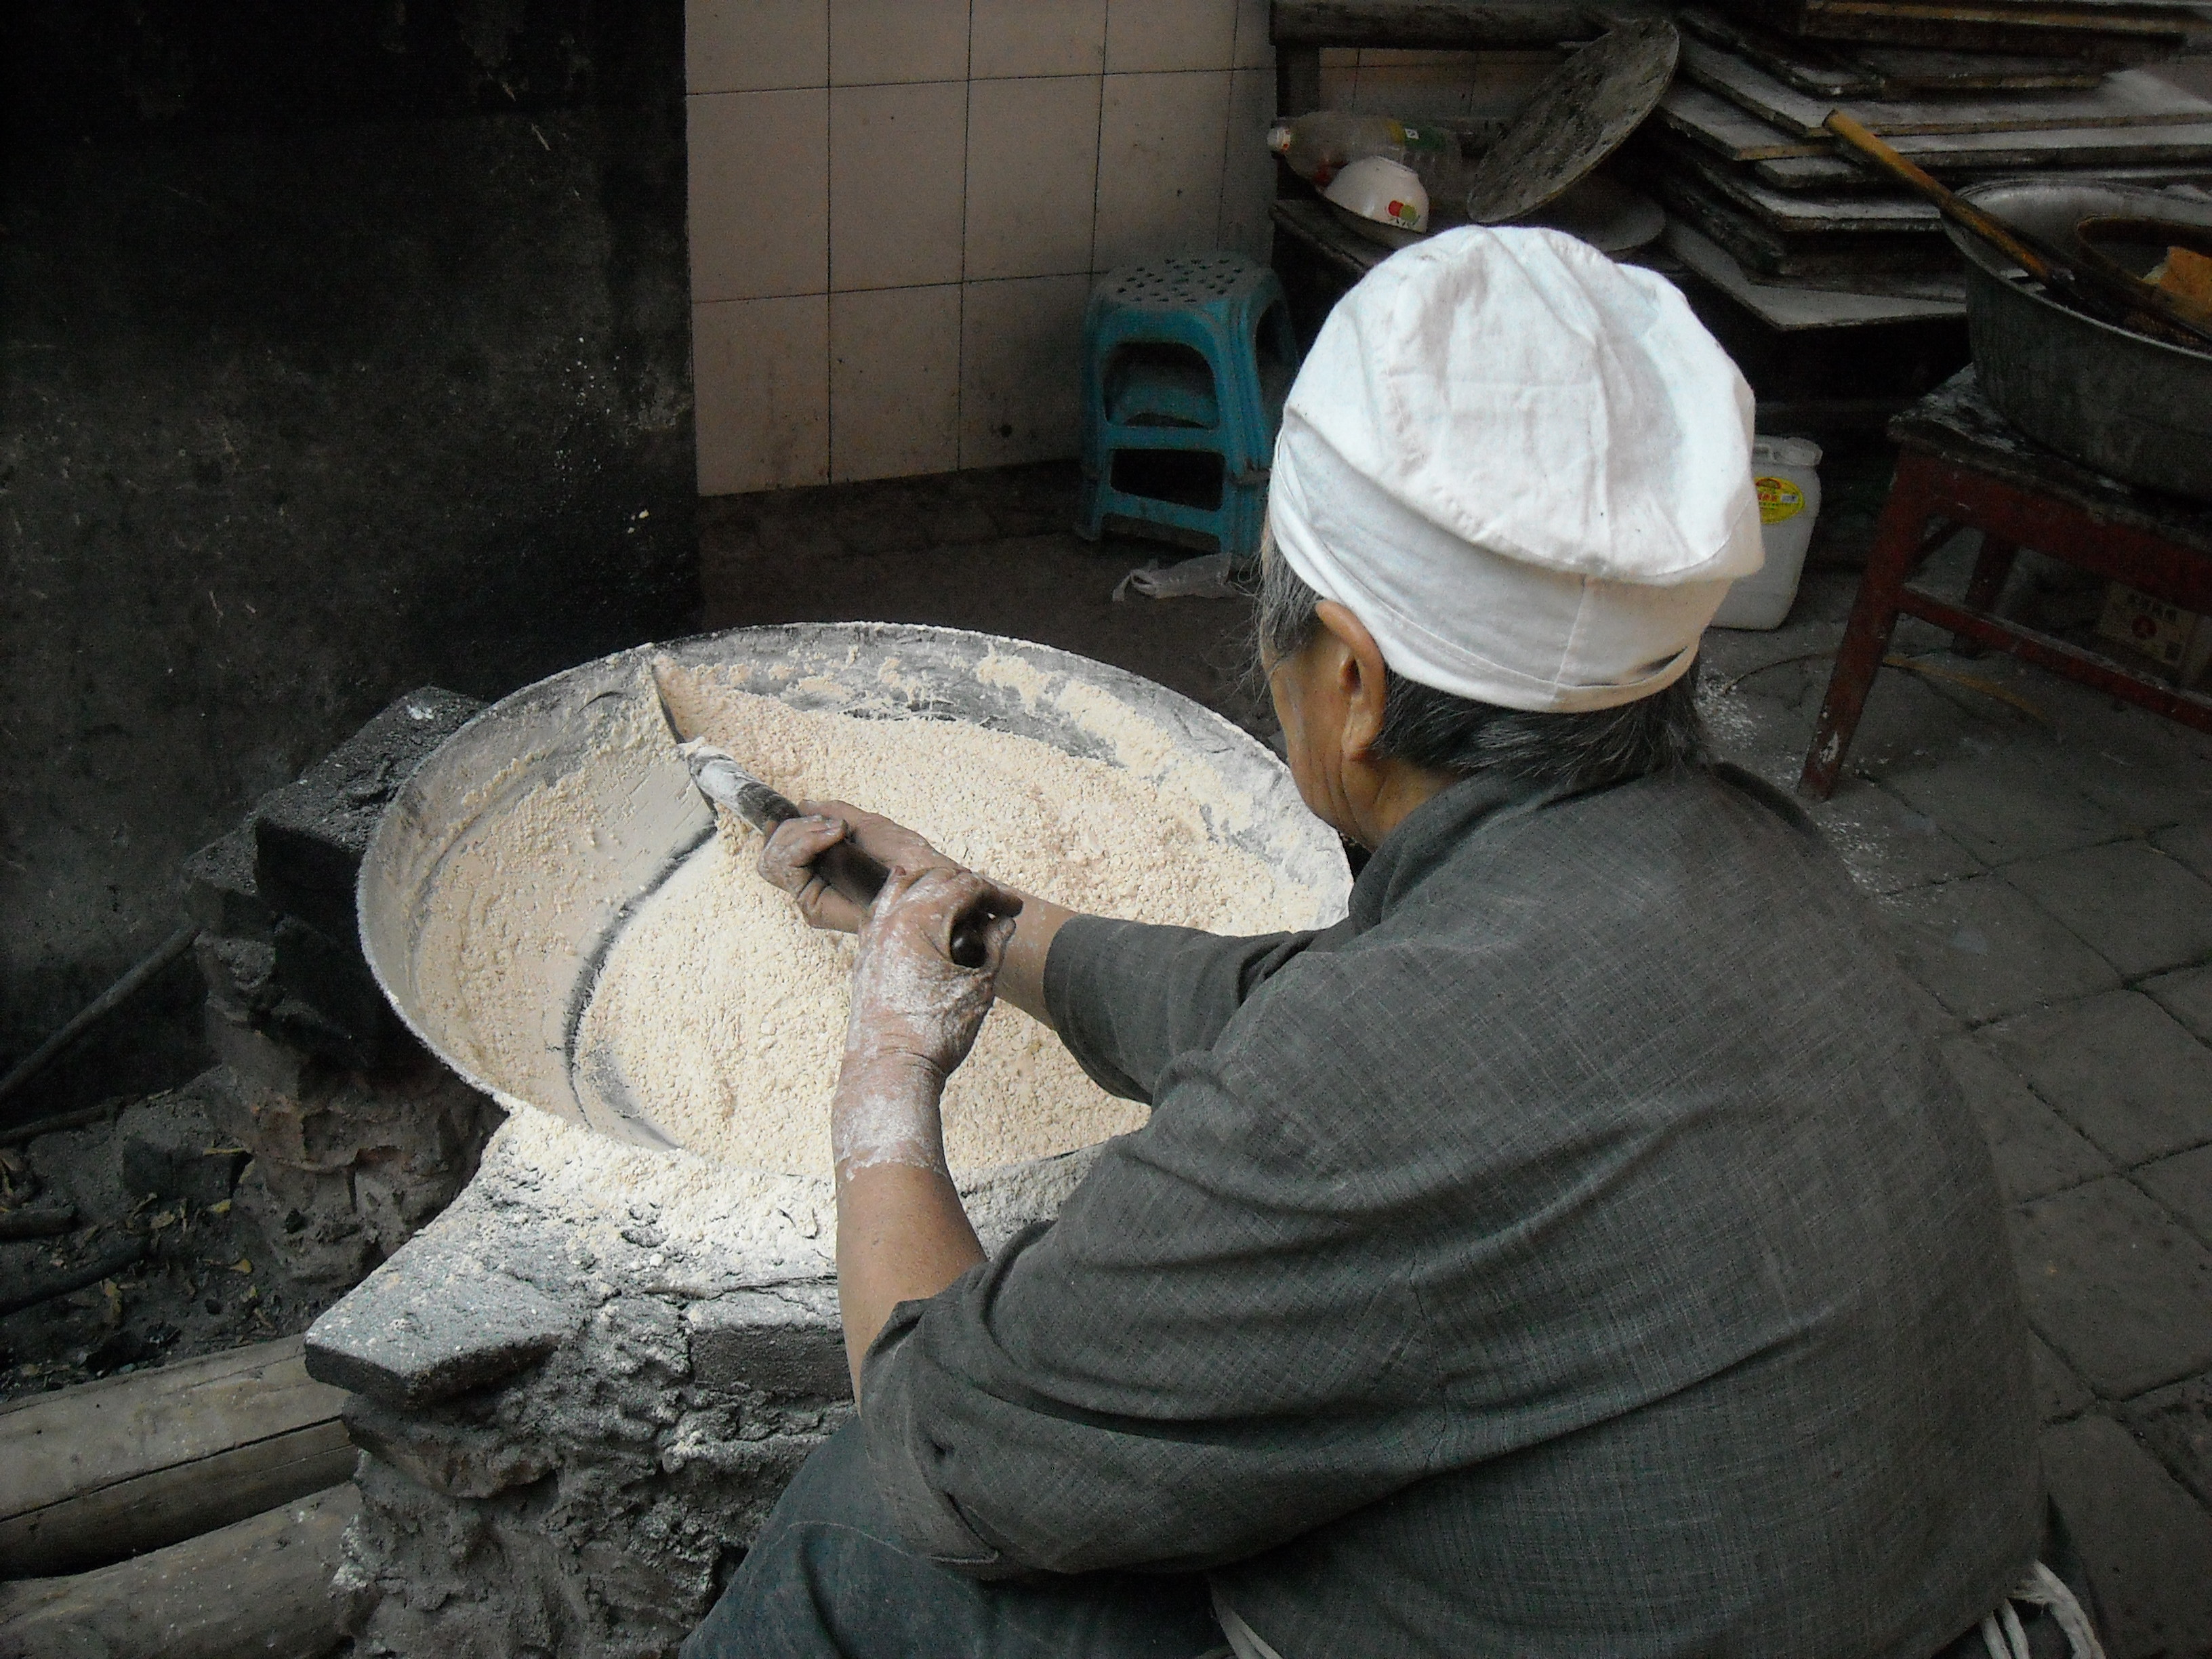 photograph of person over bowl of flour